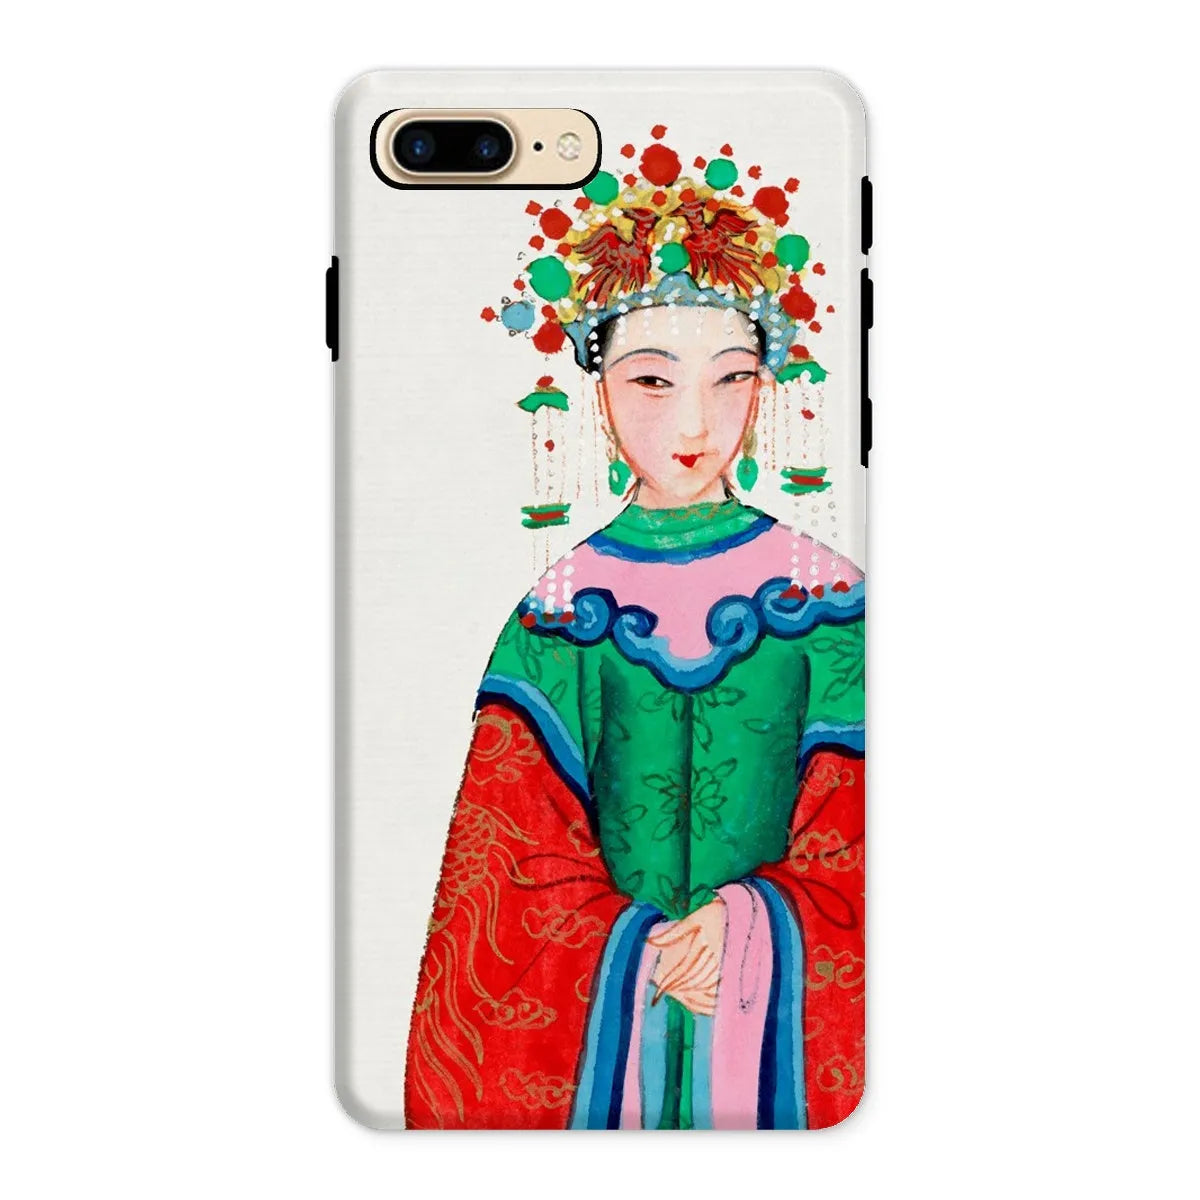 Imperial Princess - Chinese Aesthetic Painting Phone Case - Iphone 8 Plus / Matte - Mobile Phone Cases - Aesthetic Art